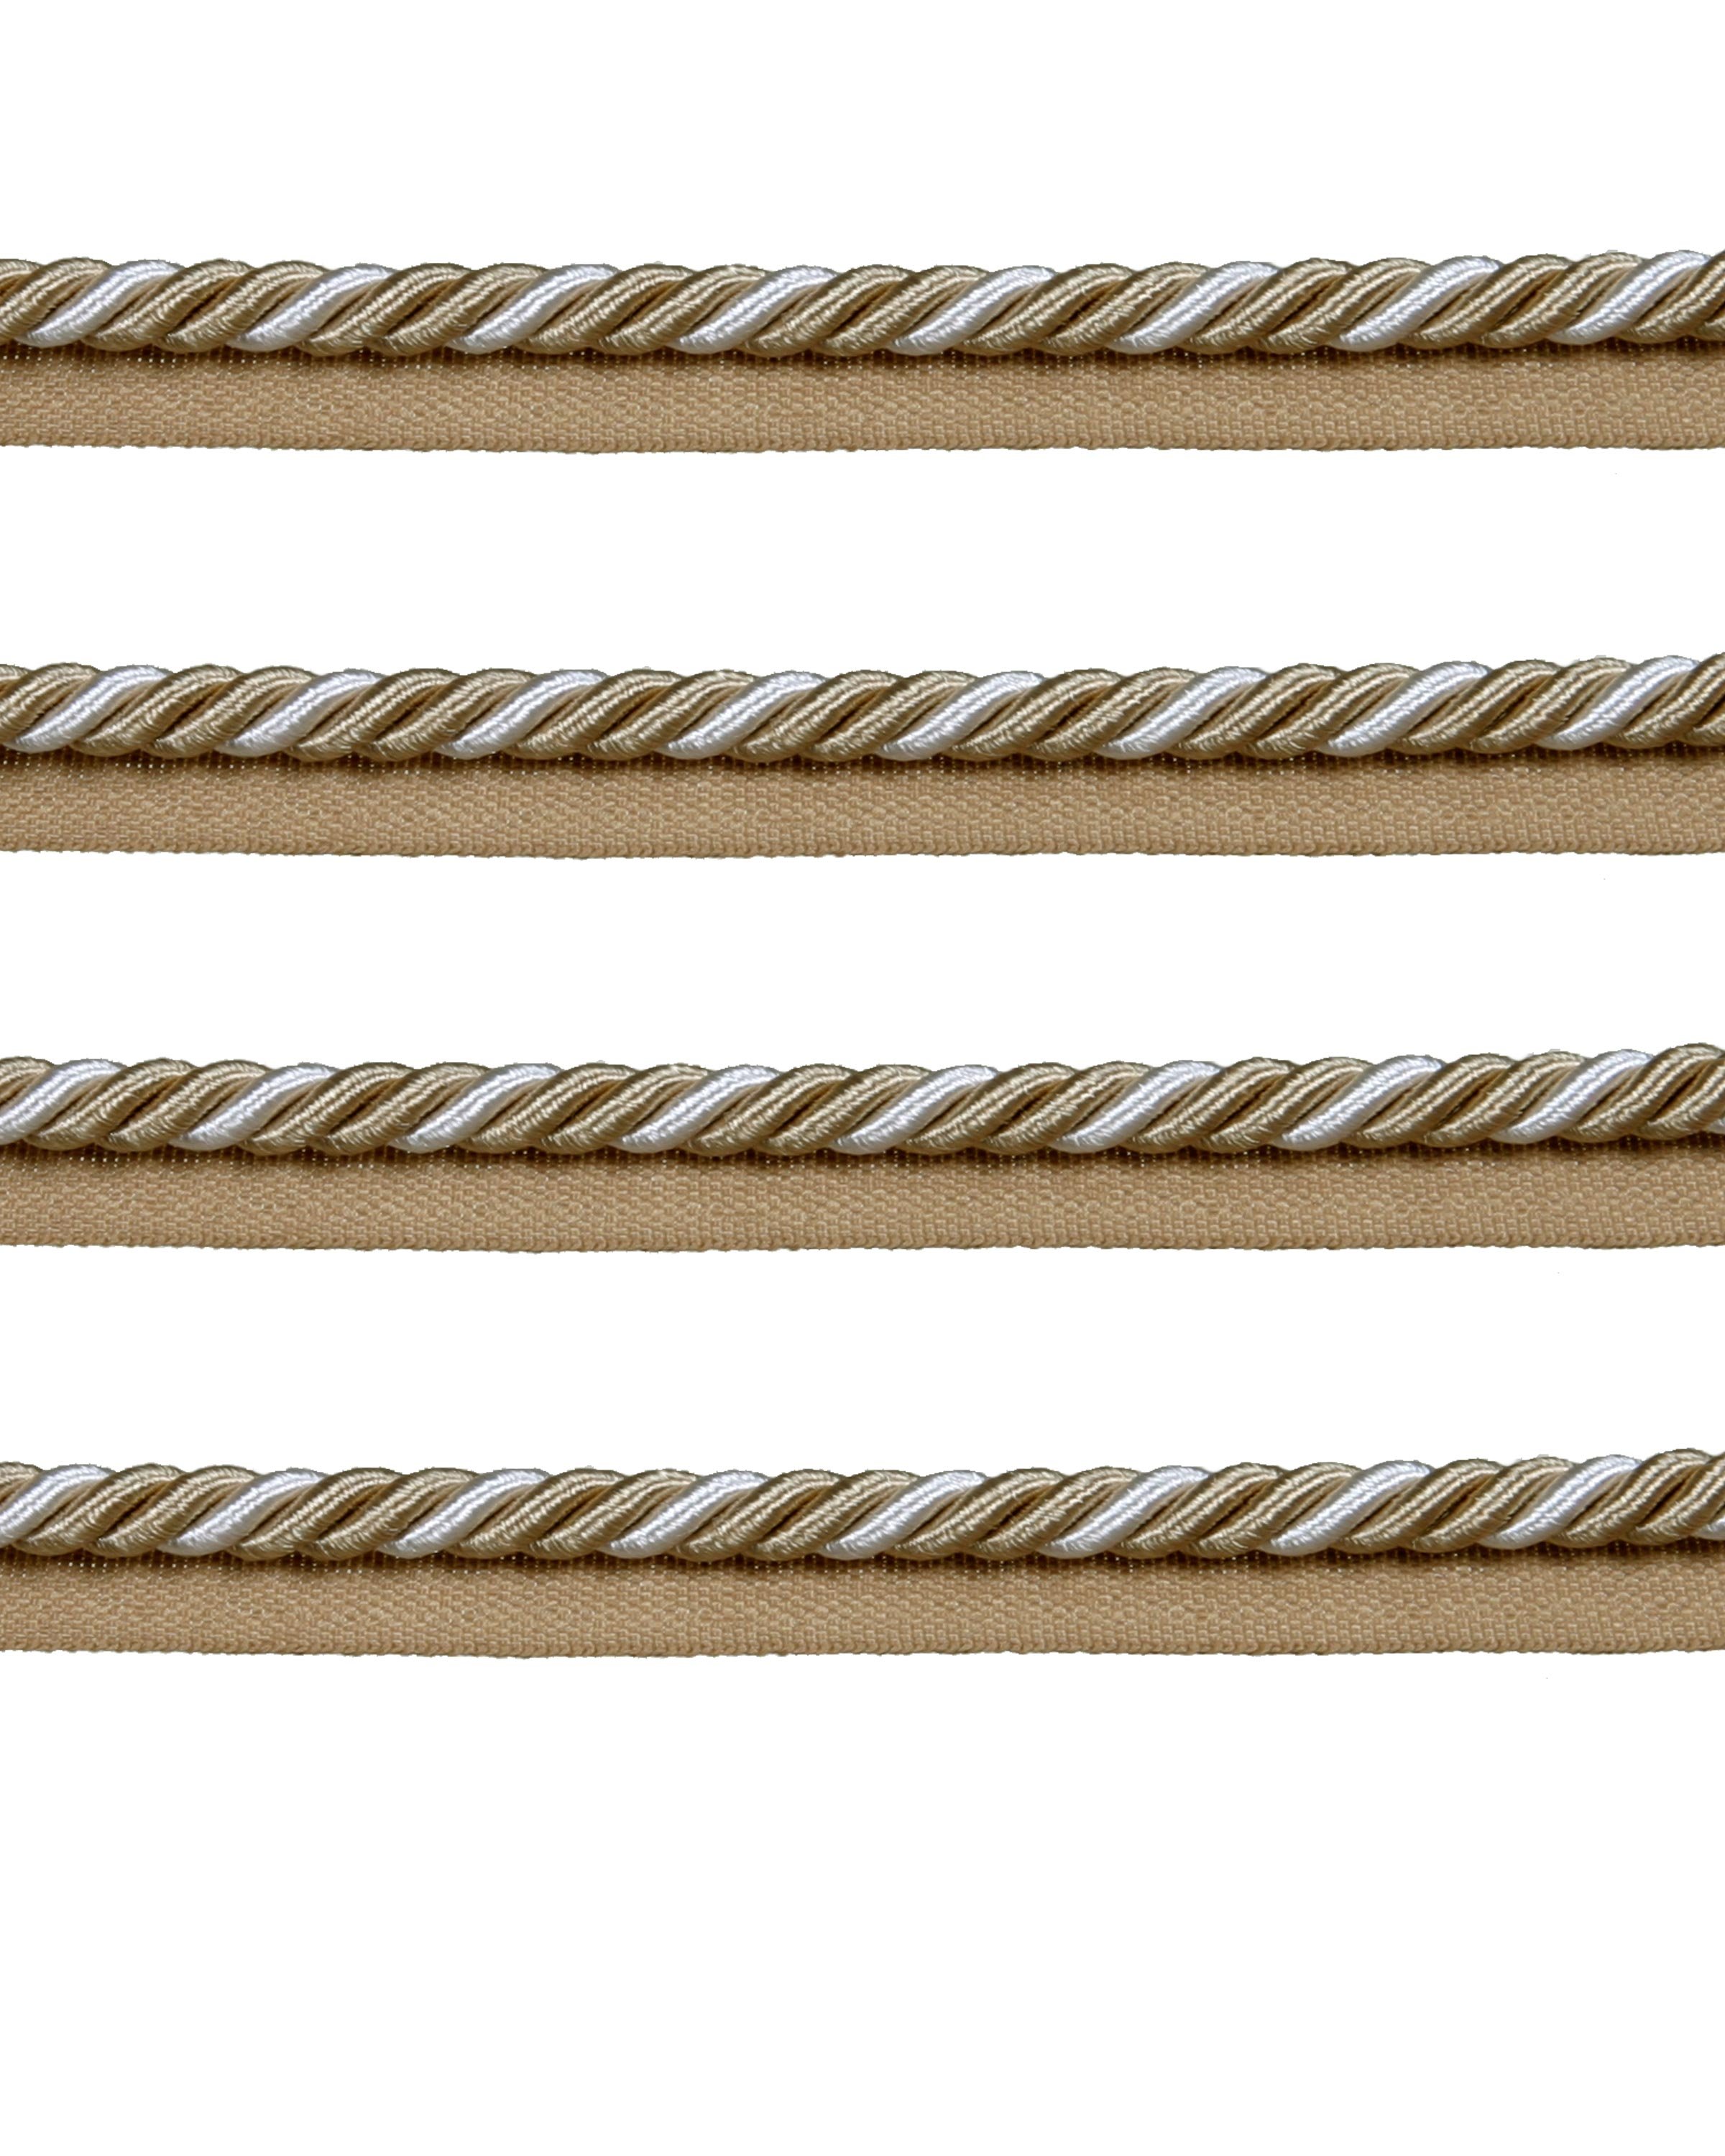 Piping Cord 8mm 2 Tone Twist on Tape - Cream / Gold Price is for 5 metres 